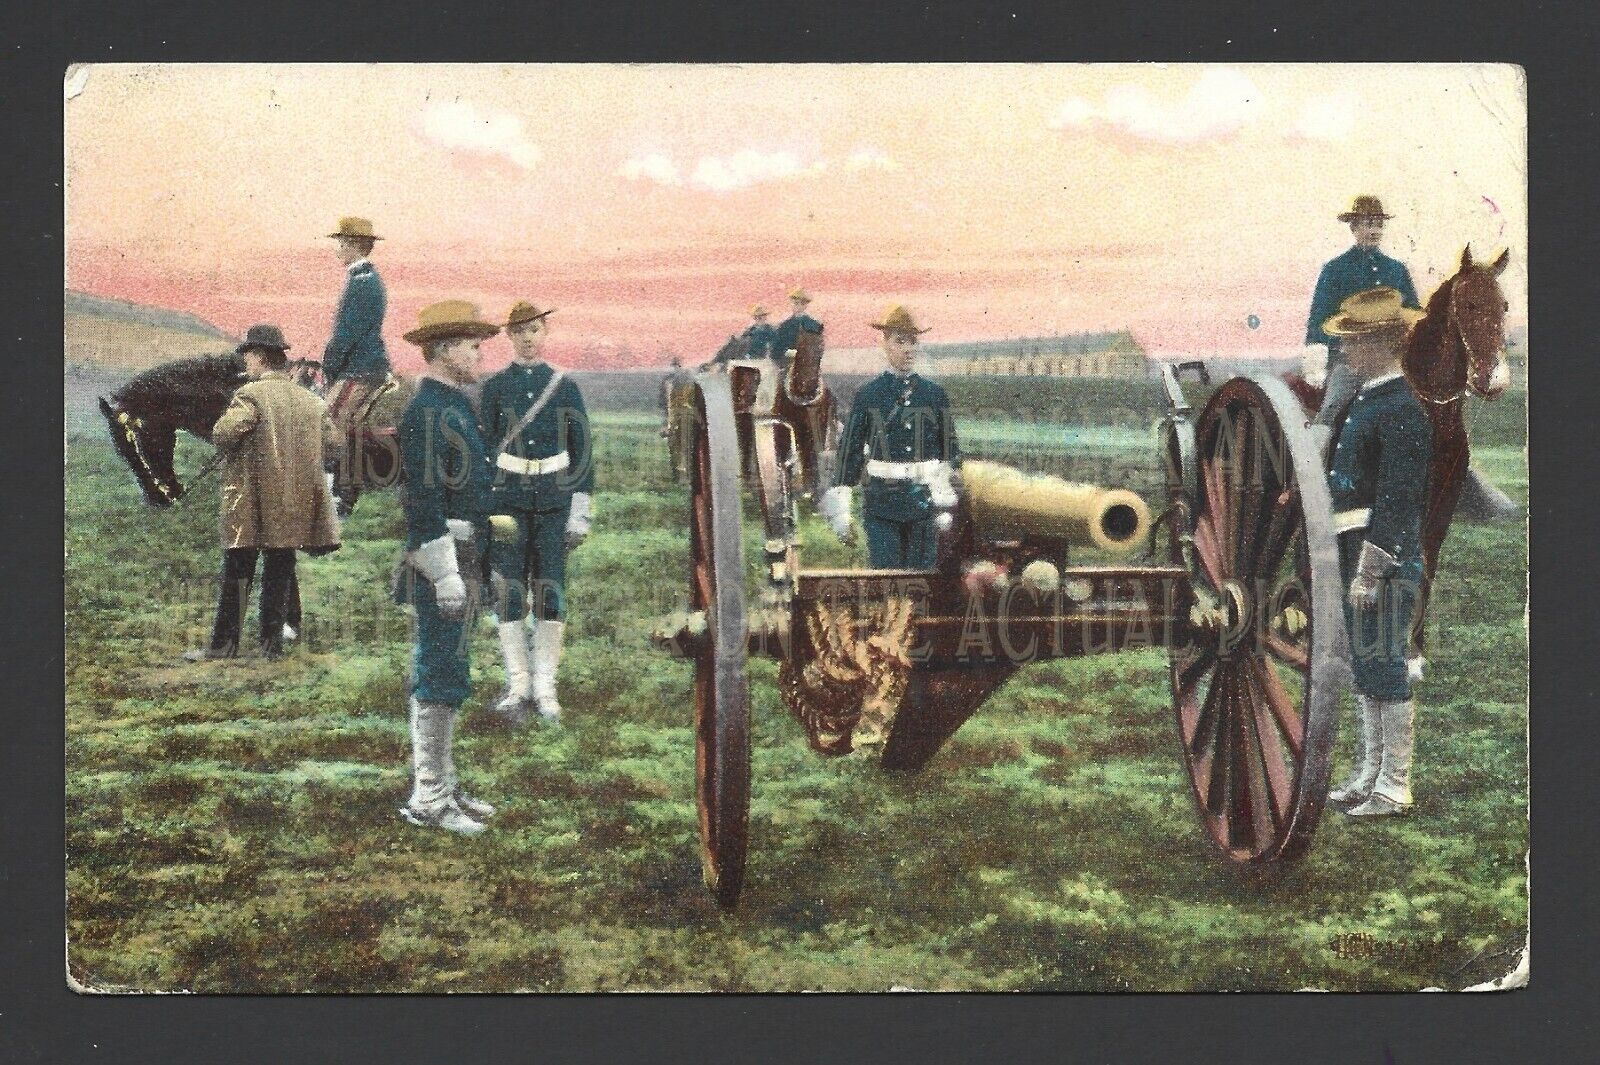 Cavalry Forces Field Artillery Canon GI 1908 Antique Postcard Junction City